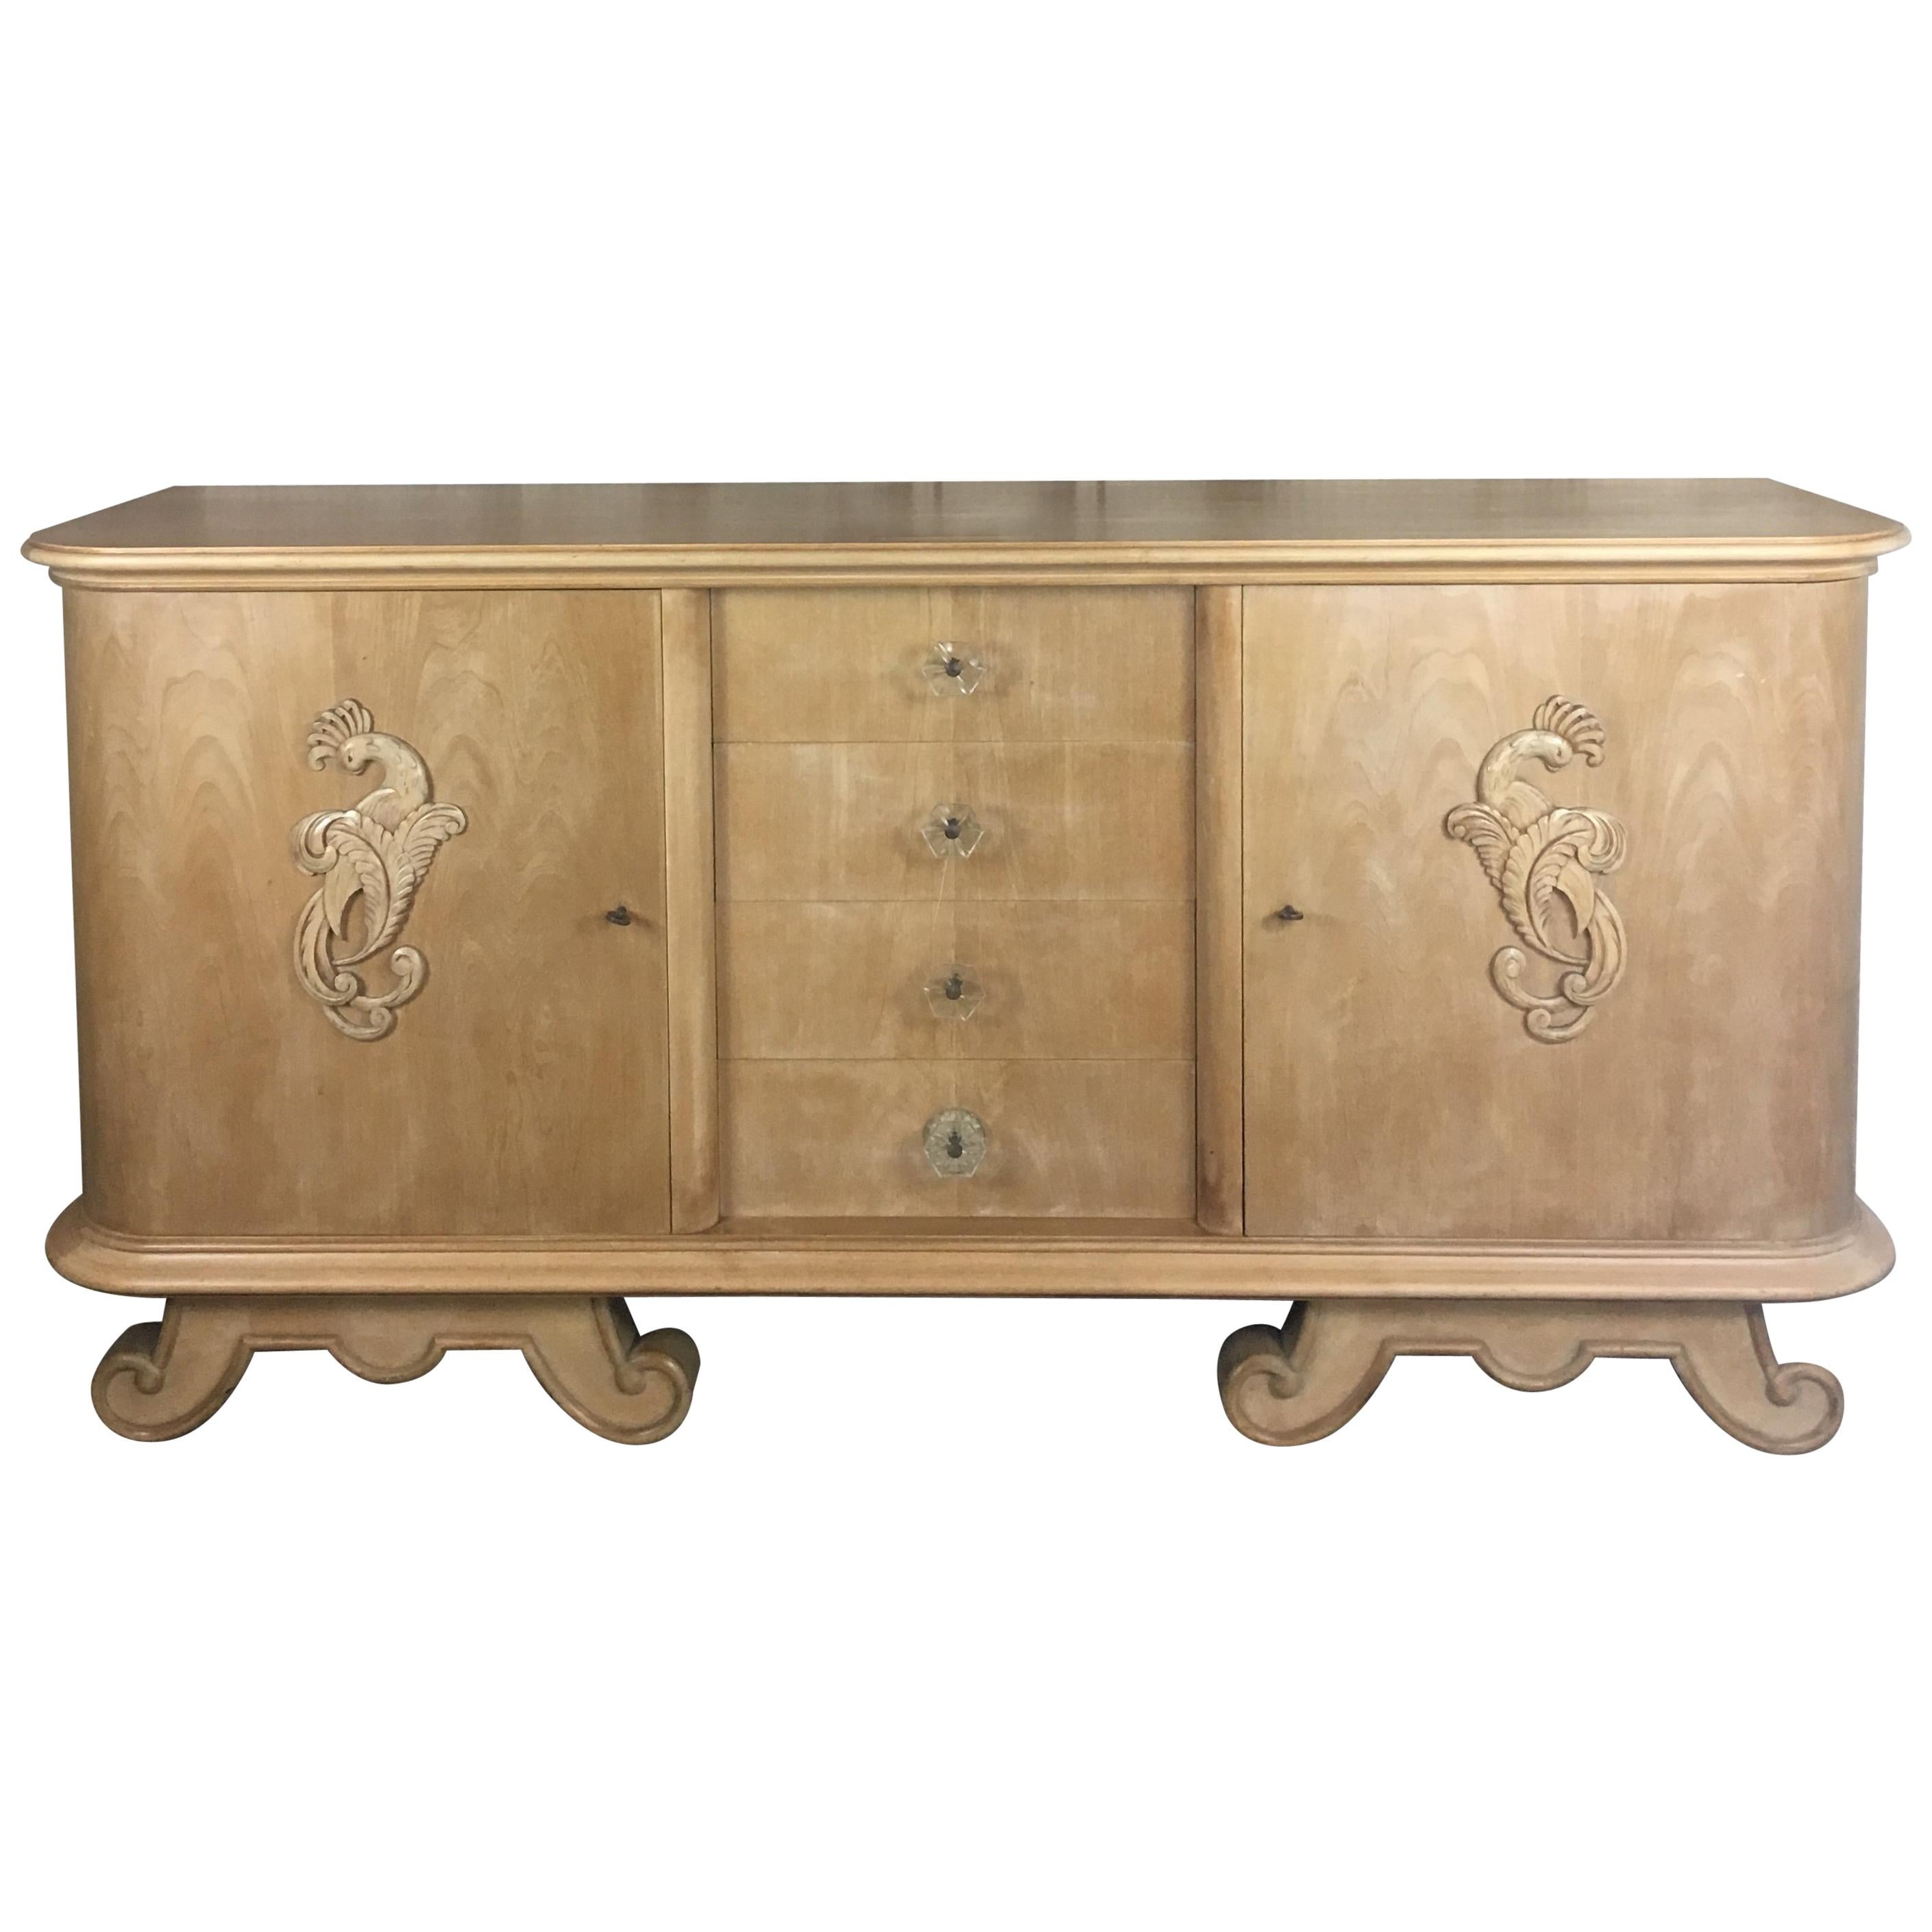 A stunning French midcentury sycamore credenza or buffet in the style of Andre Arbus with 4 drawers behind two doors having centered hand carved phoenix and trim above scrolled feet, circa 1940s. 

Beautifully designed and well crafted with ample